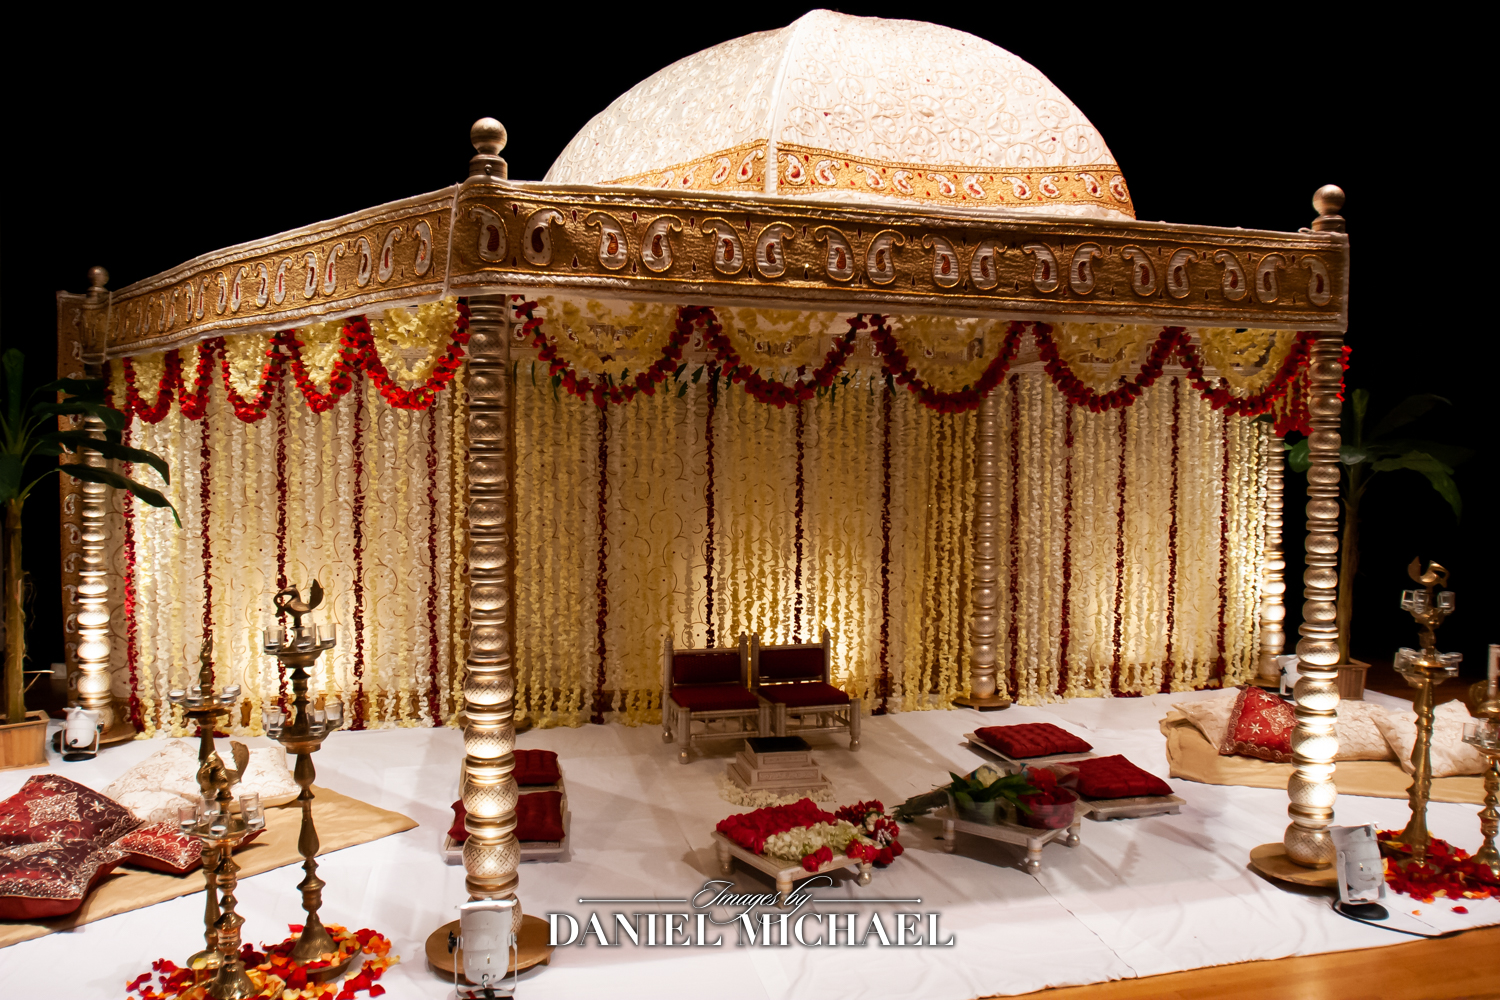 Elegant mandap adorned with red and gold fabrics at an Indian wedding